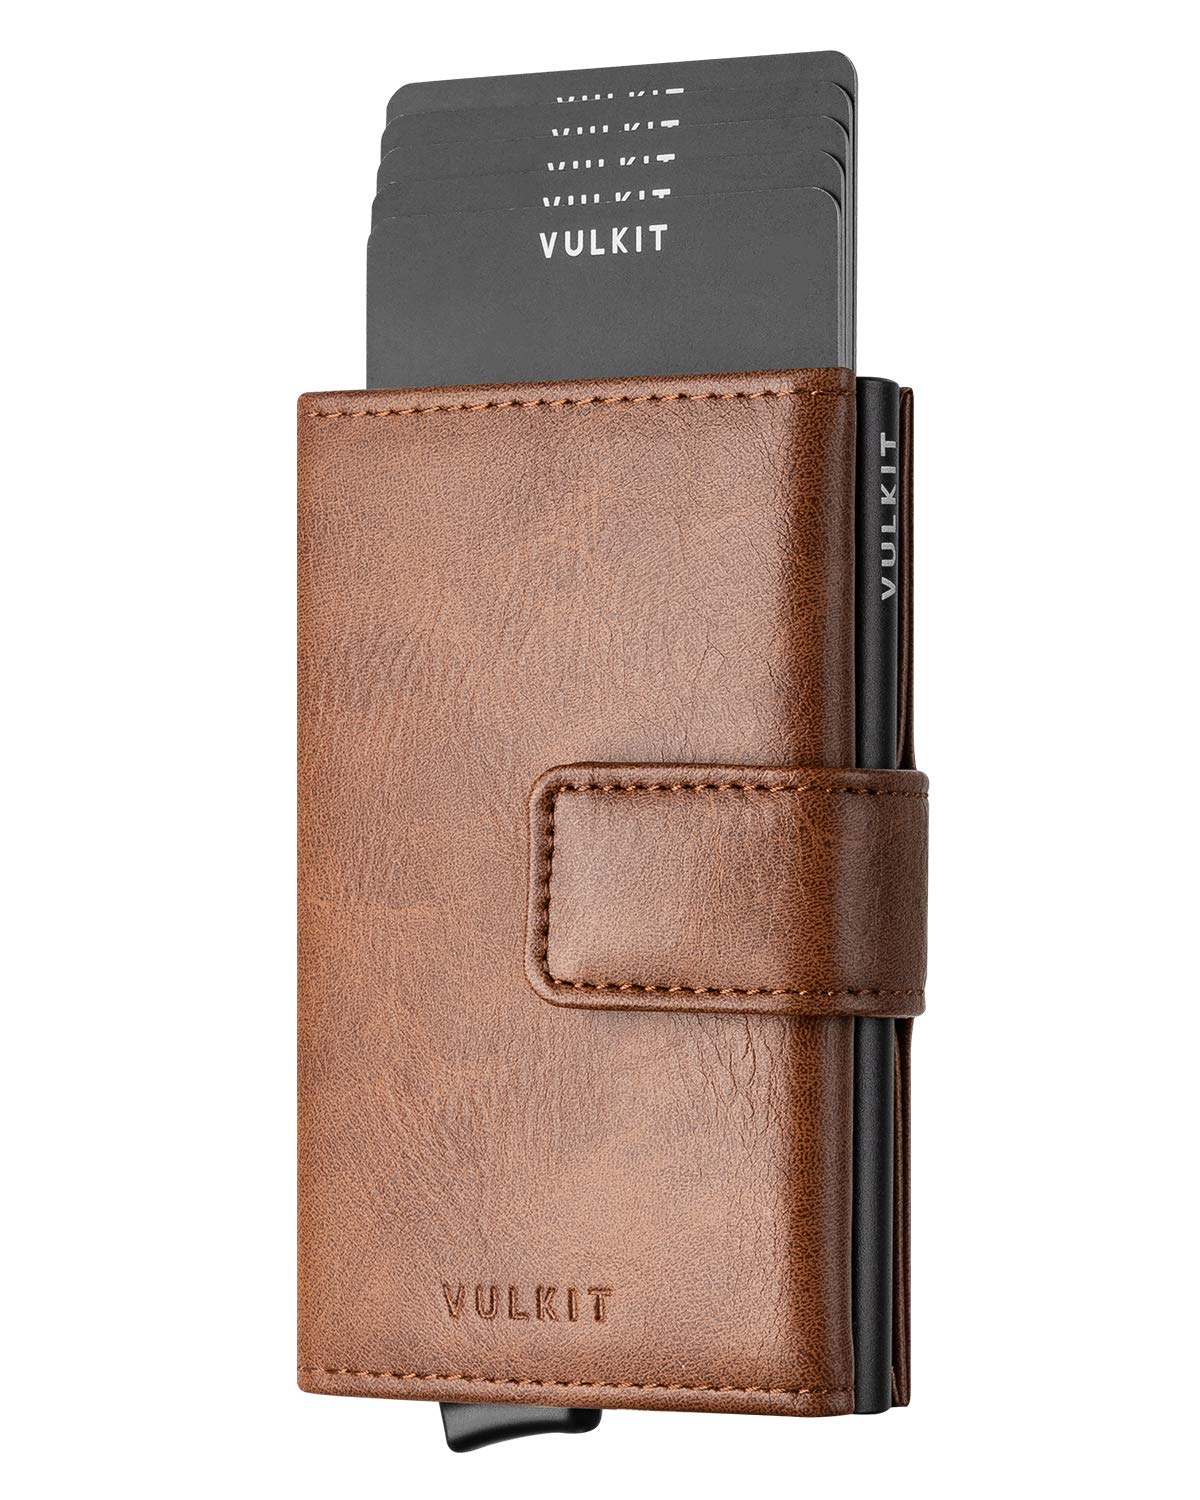 VULKIT Pop Up Wallet, Leather Automatic Credit Card Holder Wallet RFID Blocking Bifold Pocket Wallet with Banknote Slot for Wome